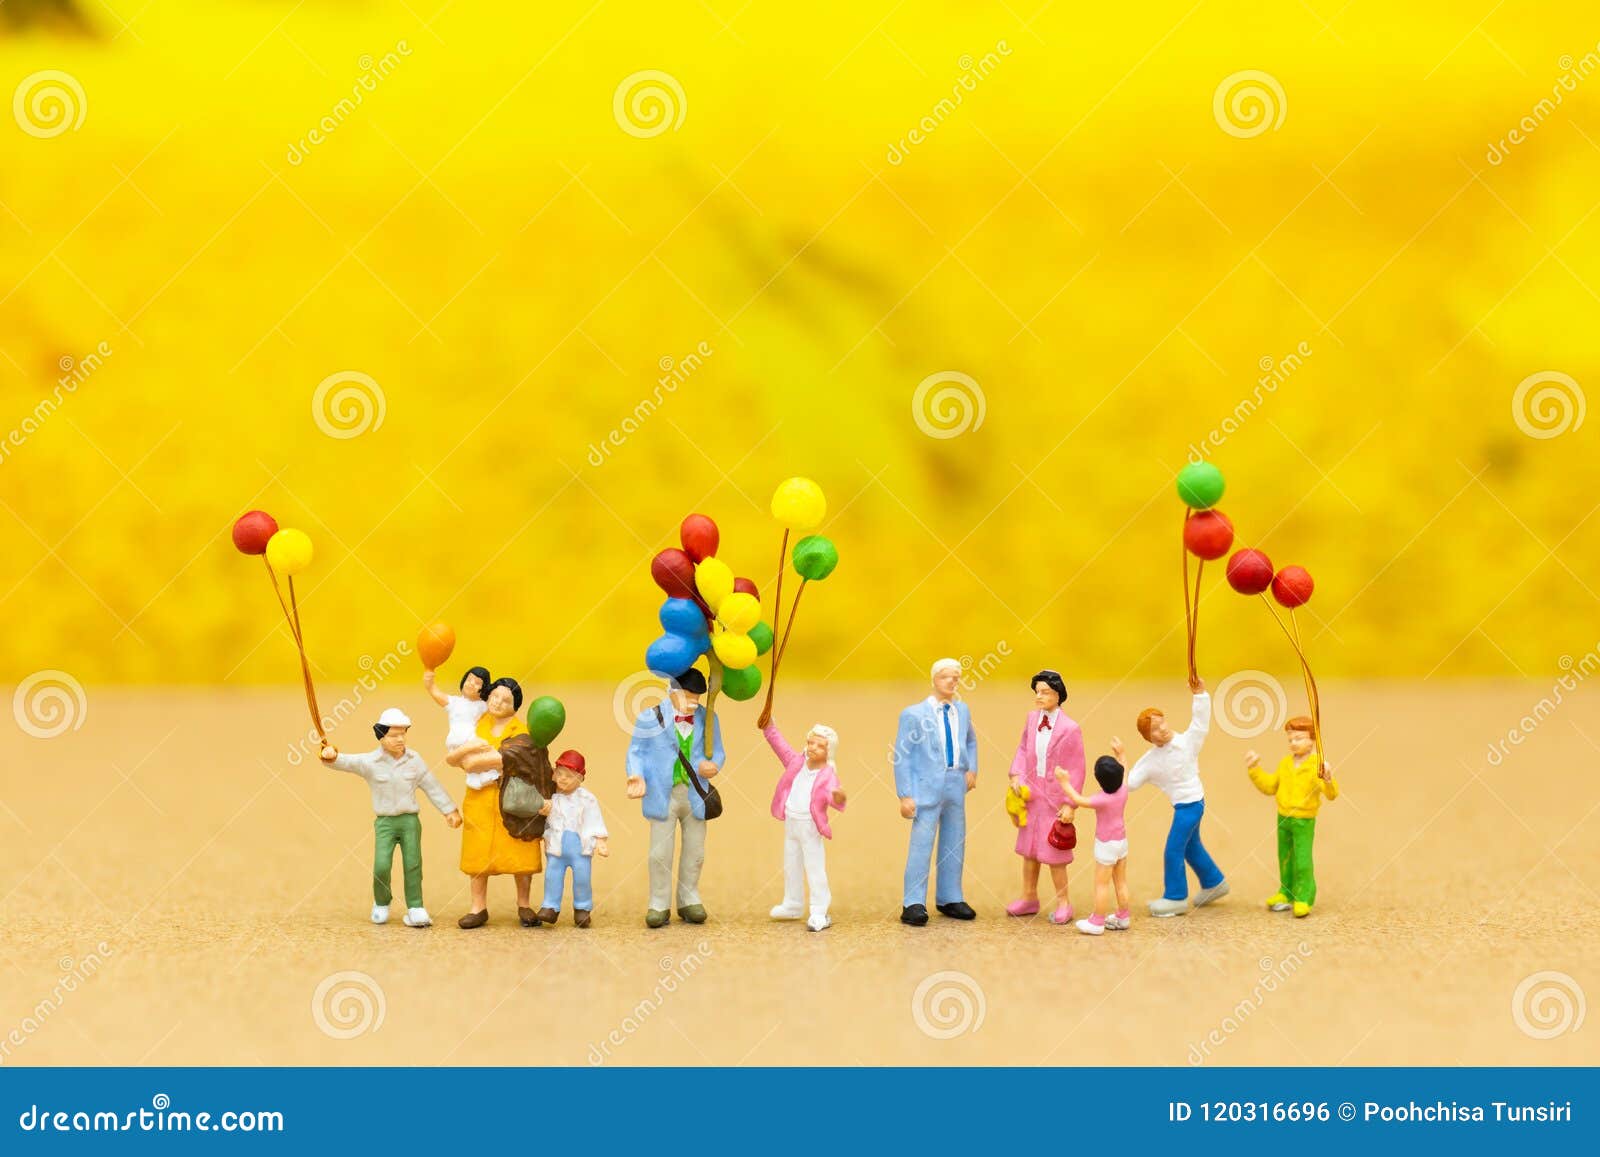 Miniature Family: Childrens Playing Balloon Together. Image Use for  Background International Day of Families Concept Stock Photo - Image of  family, child: 120316696